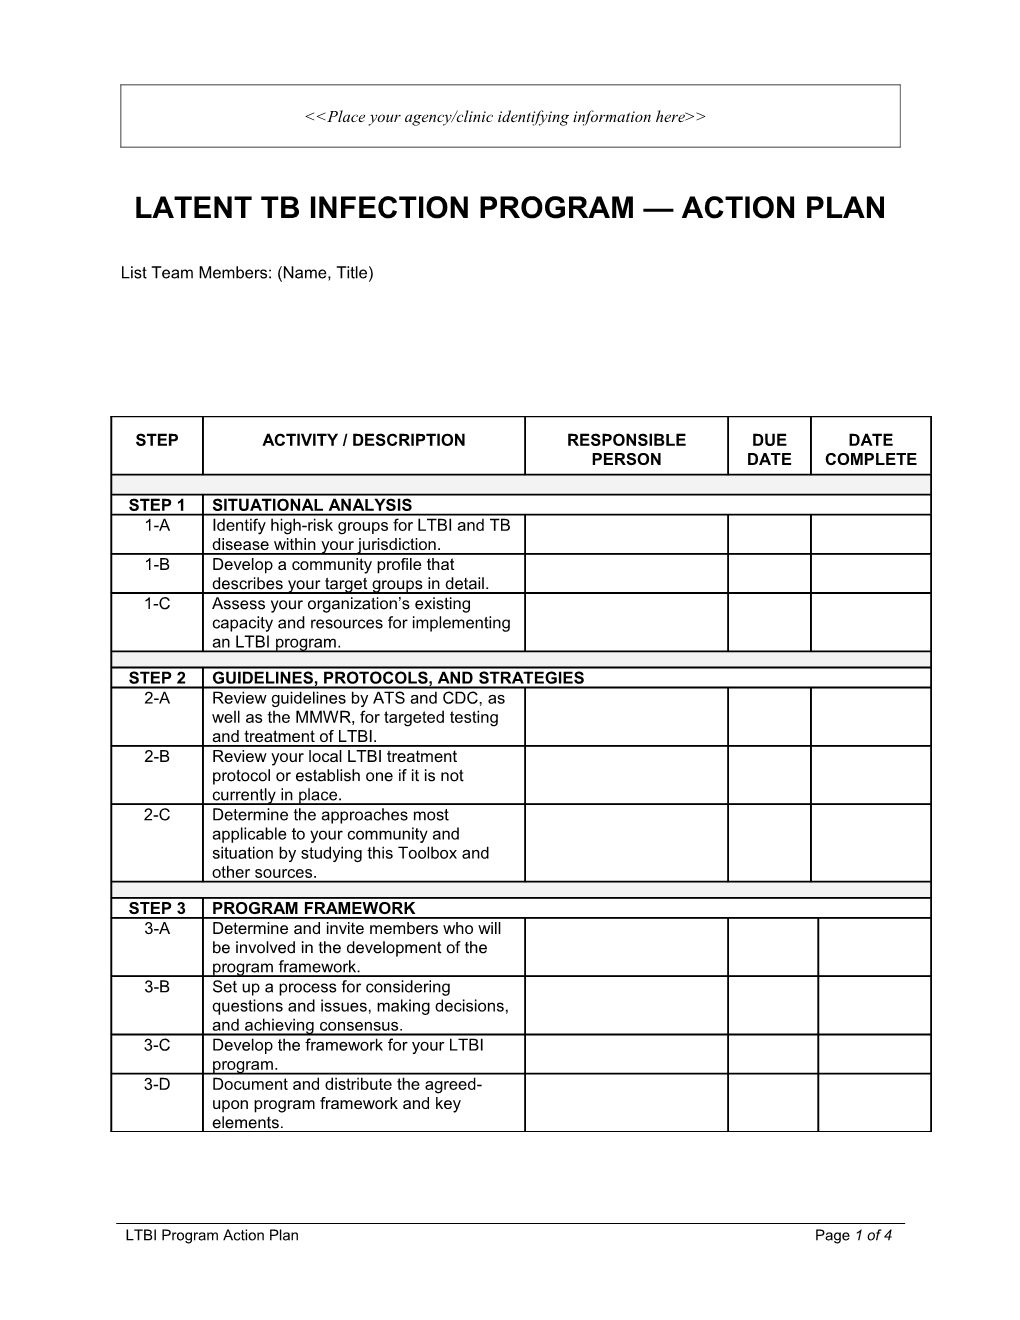 Worksite Contact Investigation Action Plan